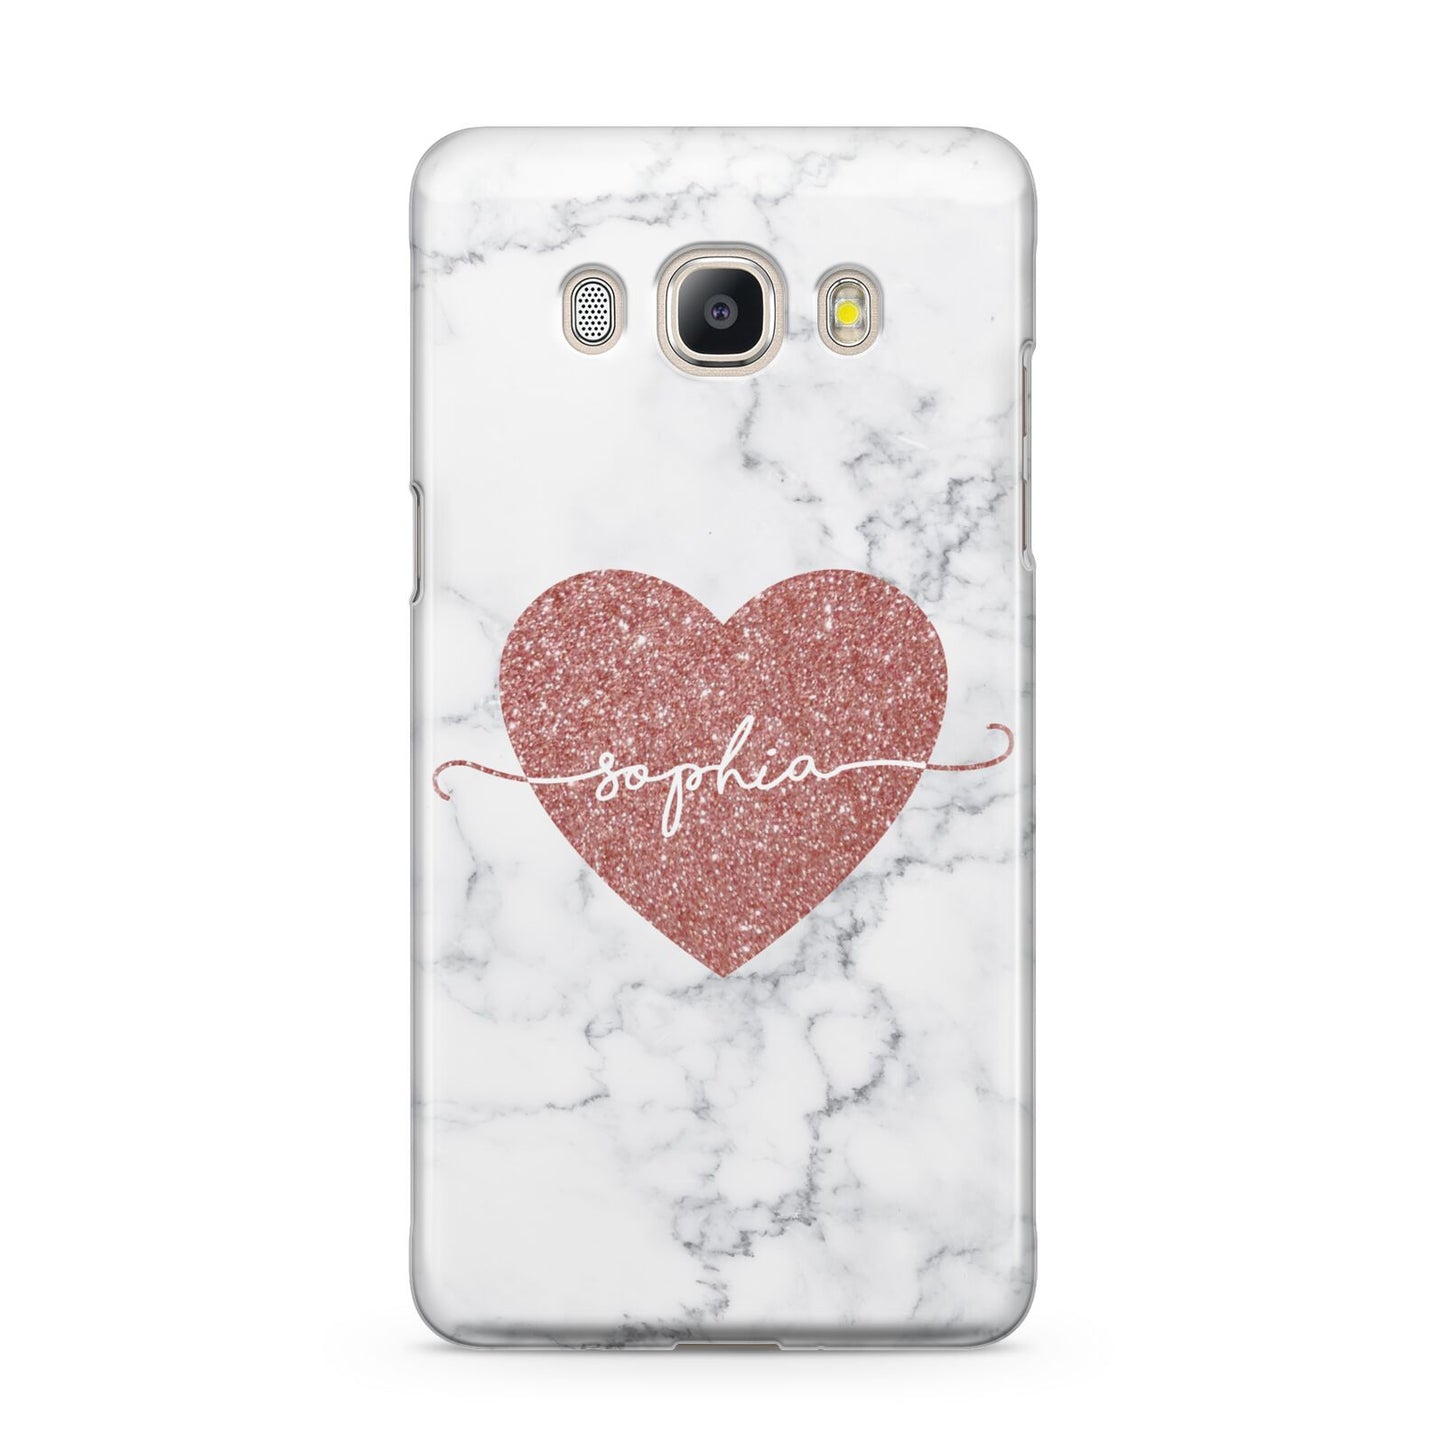 Marble Rose Gold Glitter Heart Personalised Name Samsung Galaxy J5 2016 Case